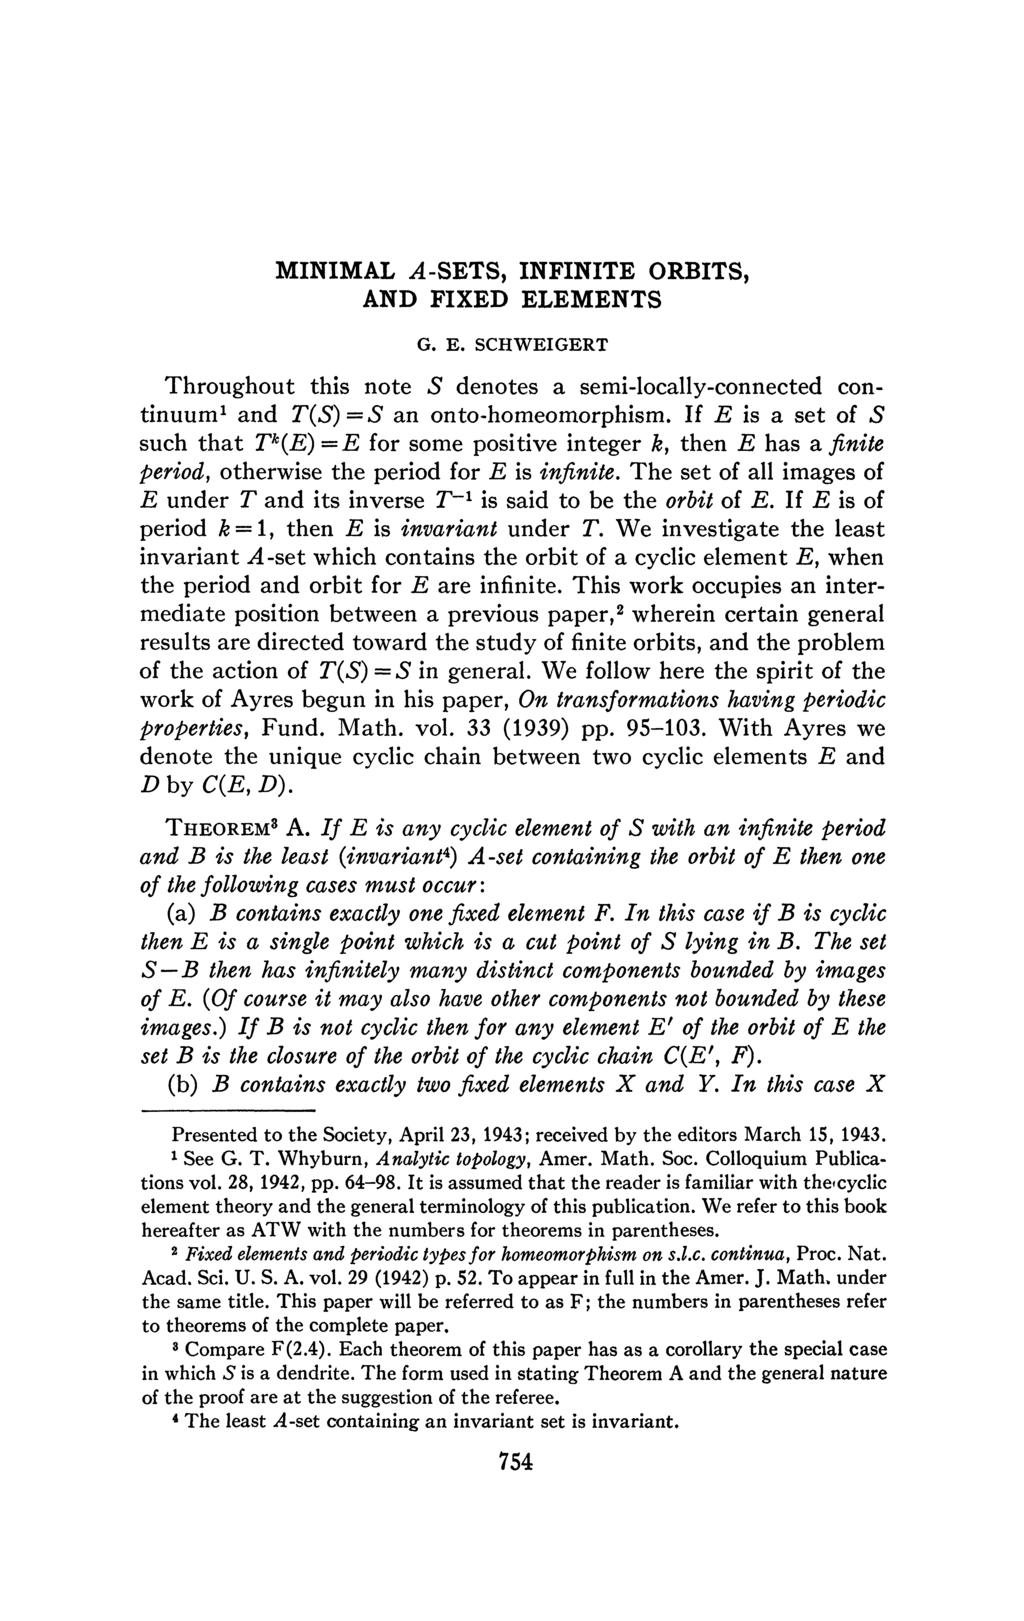 MINIMAL.4-SETS, INFINITE ORBITS, AND FIXED ELEMENTS G. E. SCHWEIGERT Throughout this note 5 denotes a semi-locally-connected continuum 1 and T(S)=S an onto-homeomorphism.